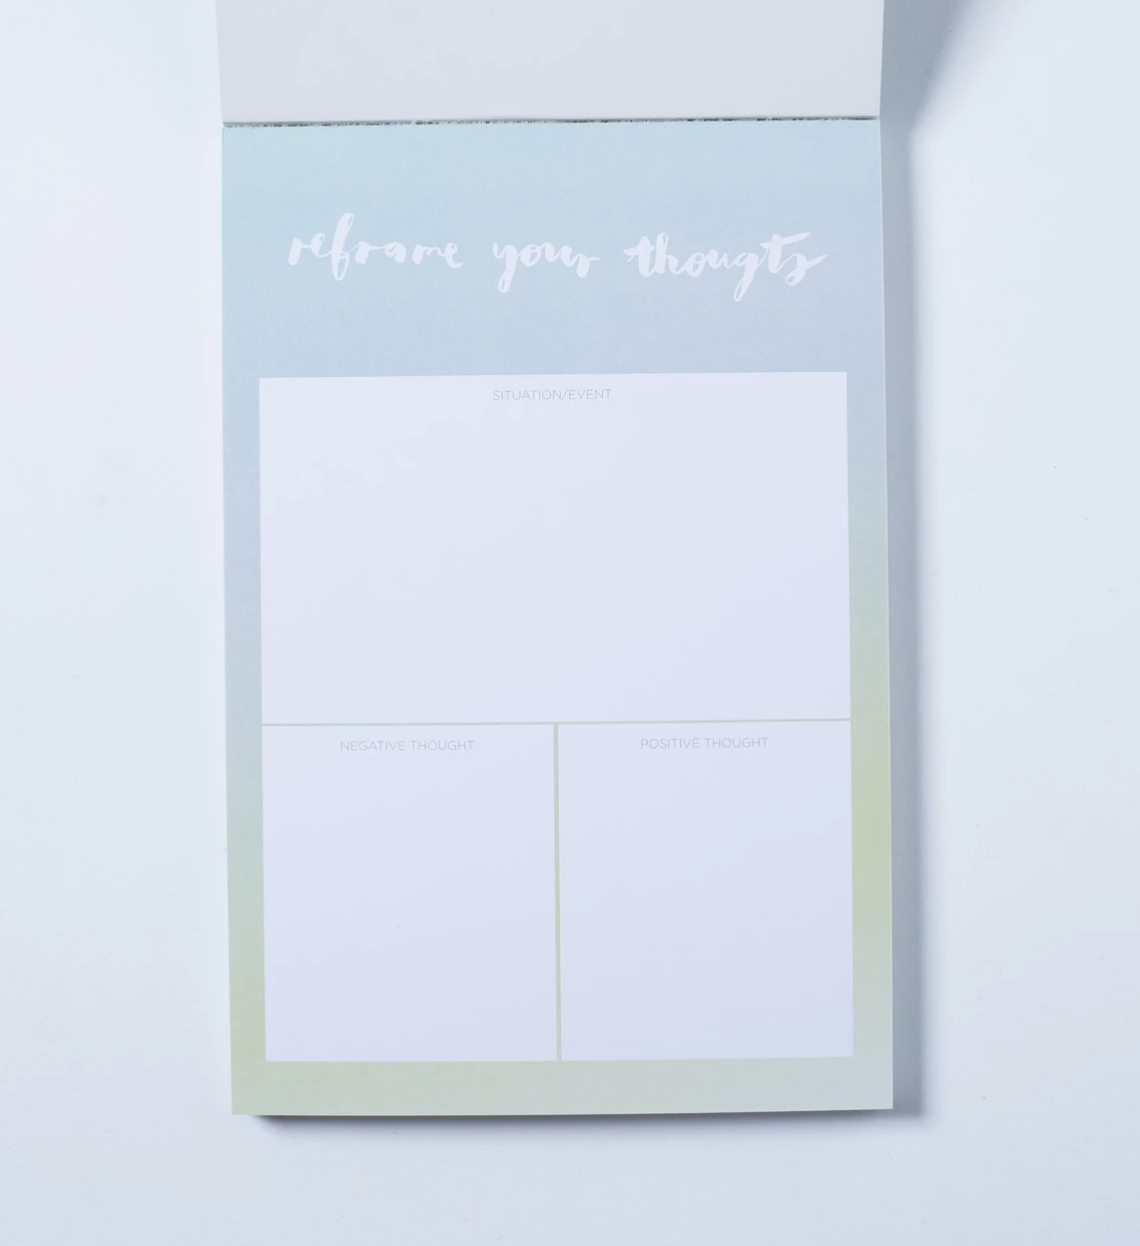 The Happiness Planner - "REFRAME YOUR THOUGHTS" NOTEPAD